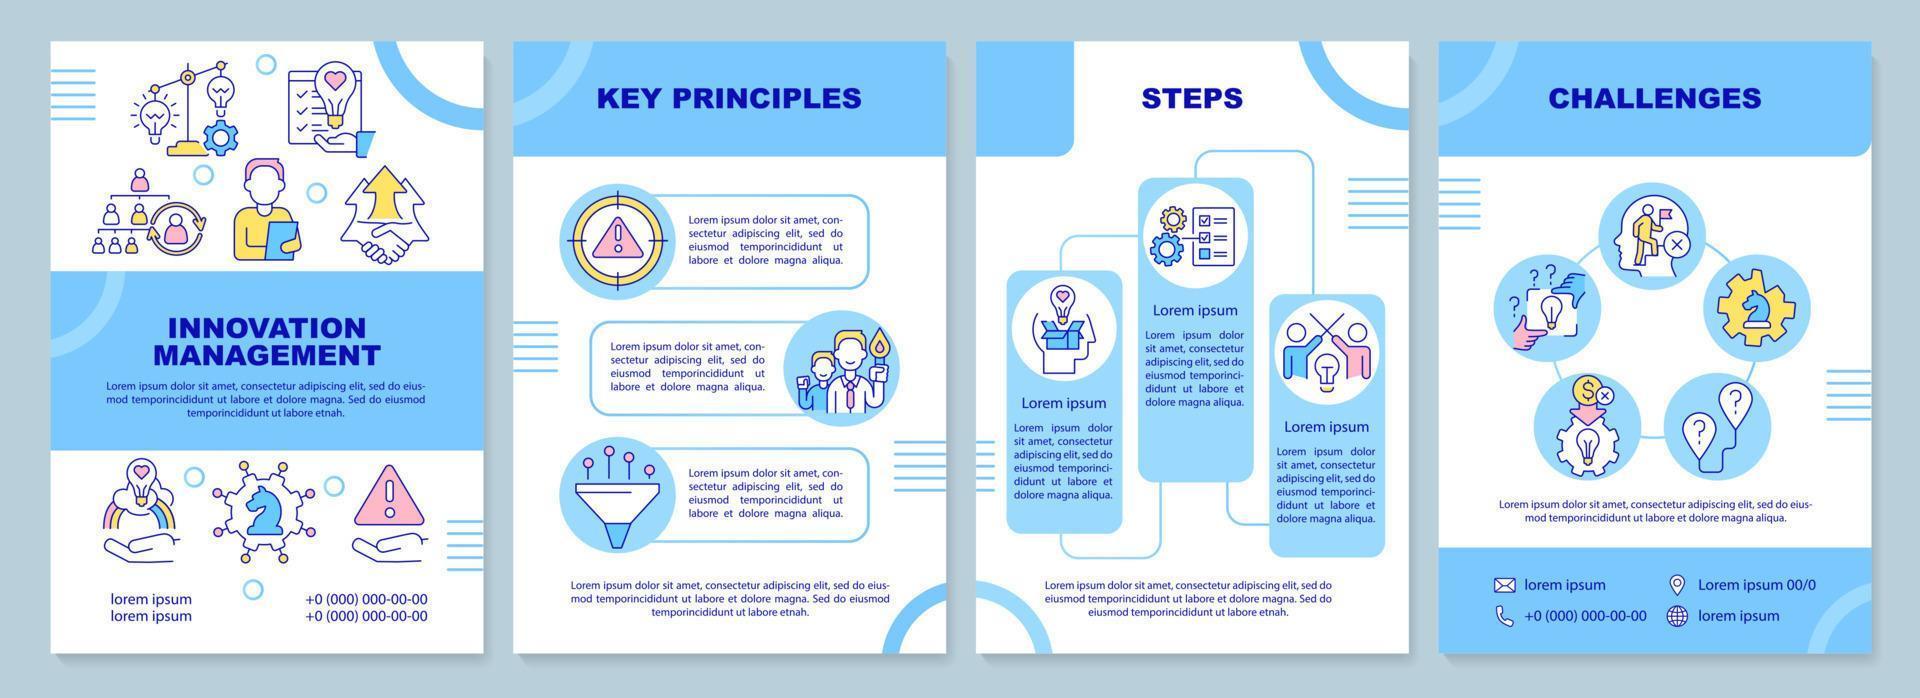 Innovation management process blue brochure template. Key principles. Leaflet design with linear icons. 4 vector layouts for presentation, annual reports.